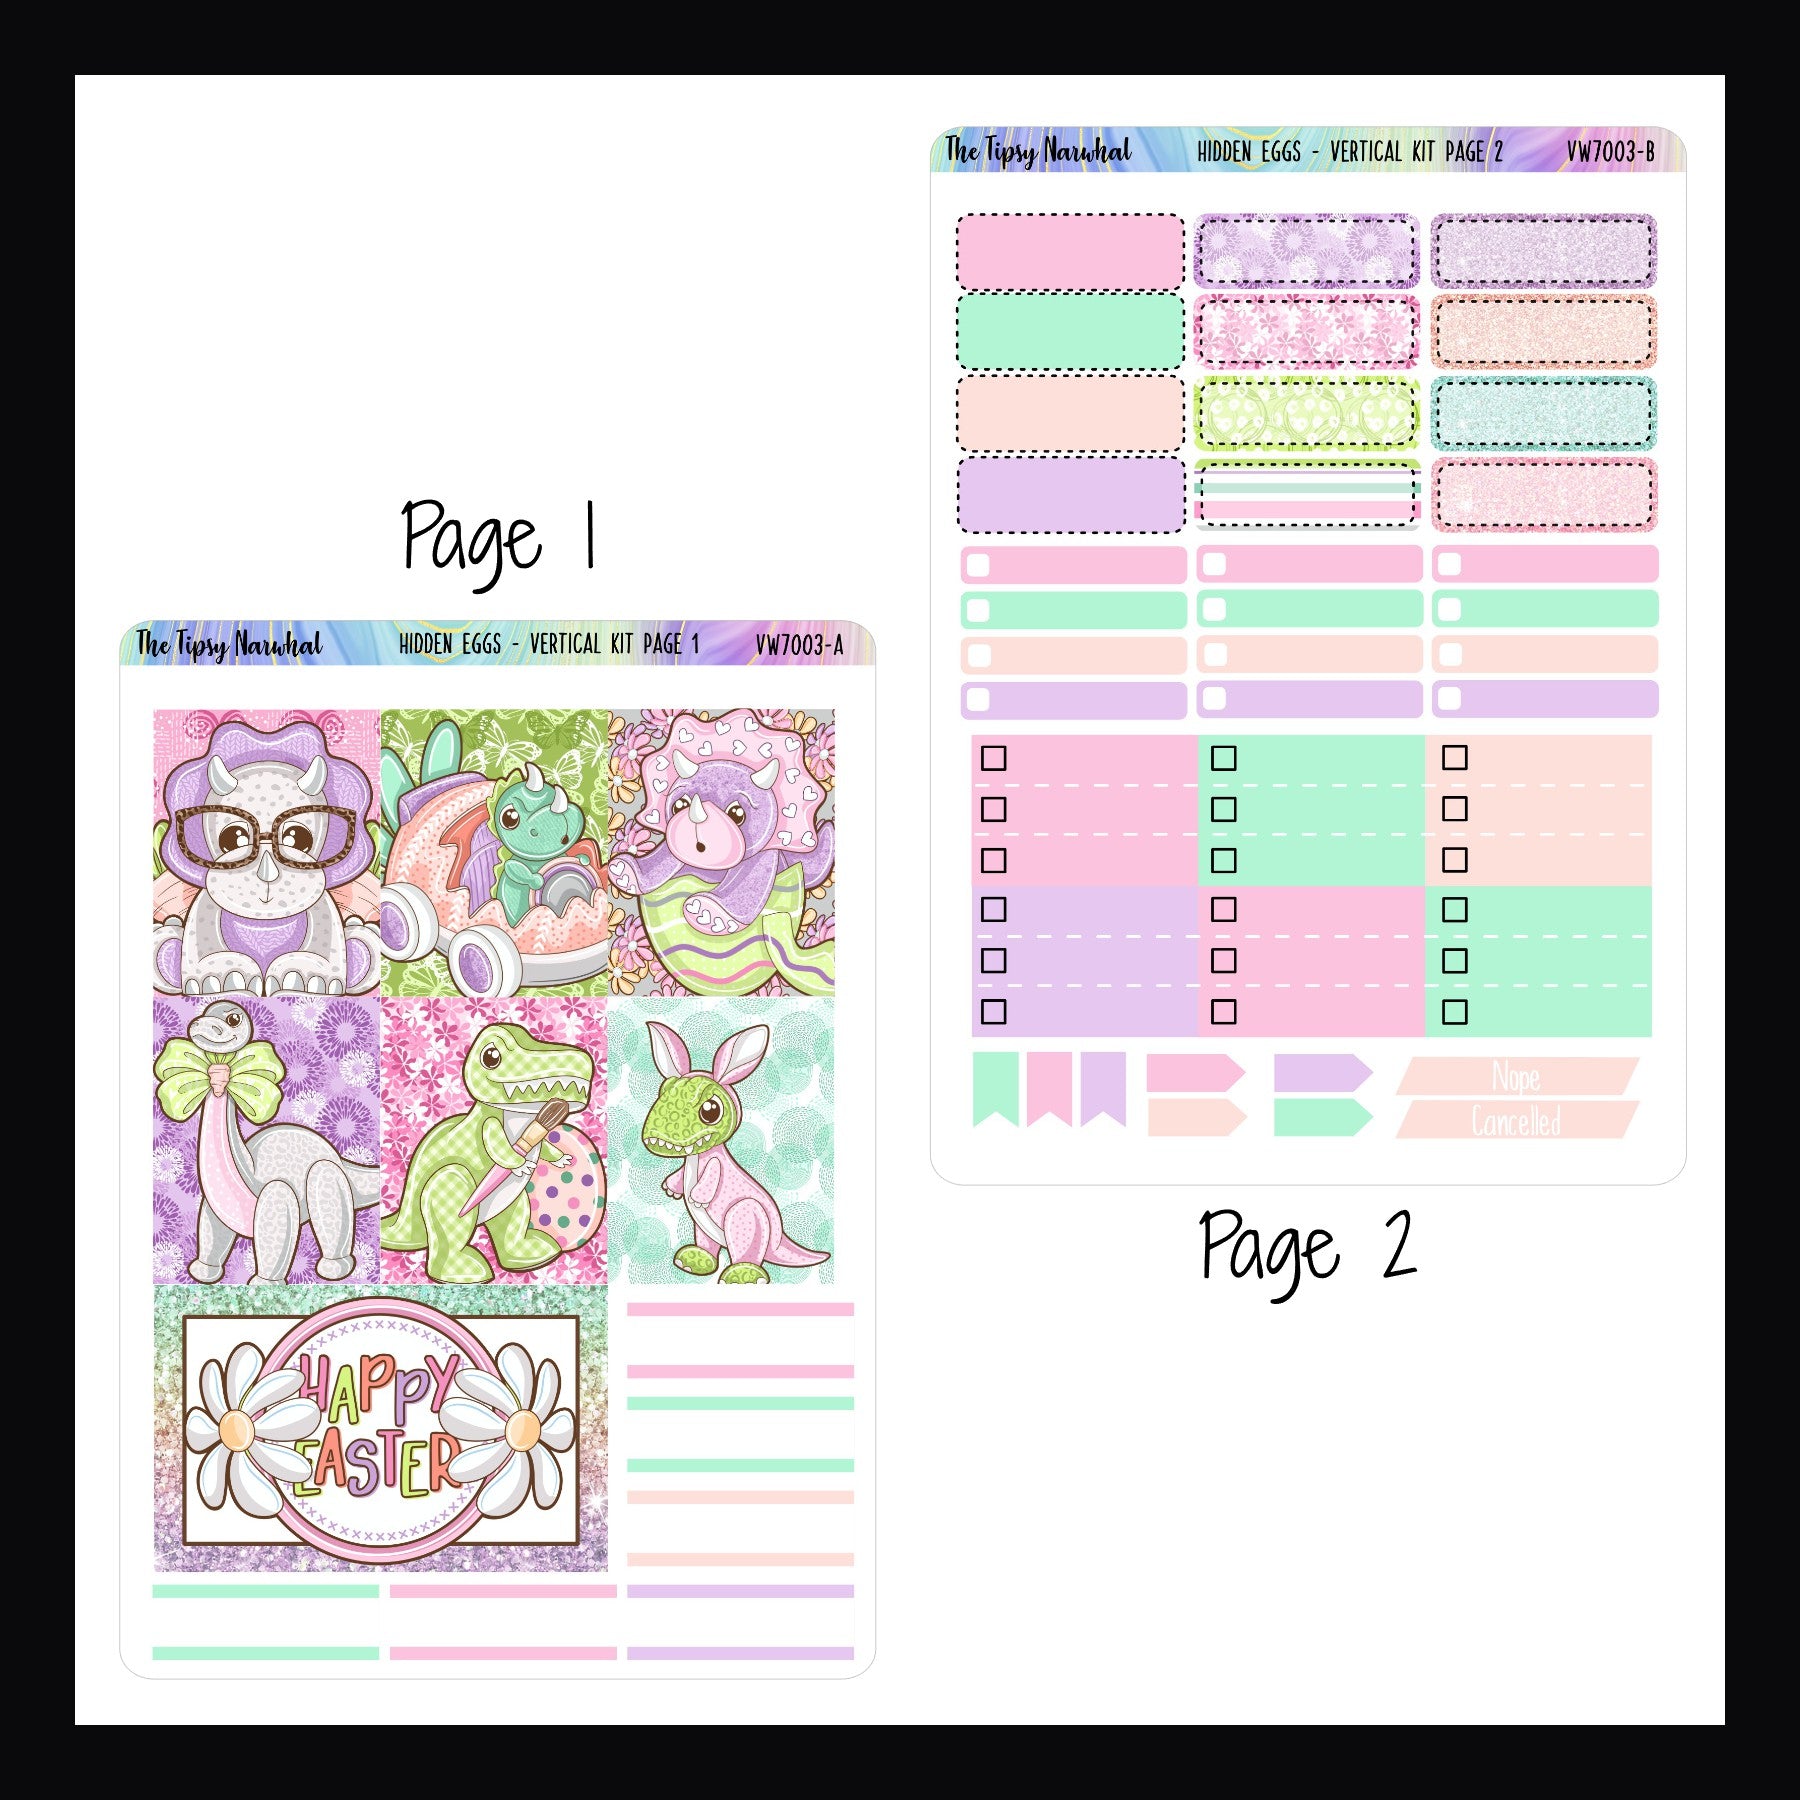 Digital Hidden Eggs Vertical Kit Pages 1 and 2. Page one features full box size decor stickers and some small appointment stickers. Page 2 features appointment stickers, skinny check box stickers, top 3 priority checklists and flag stickers.